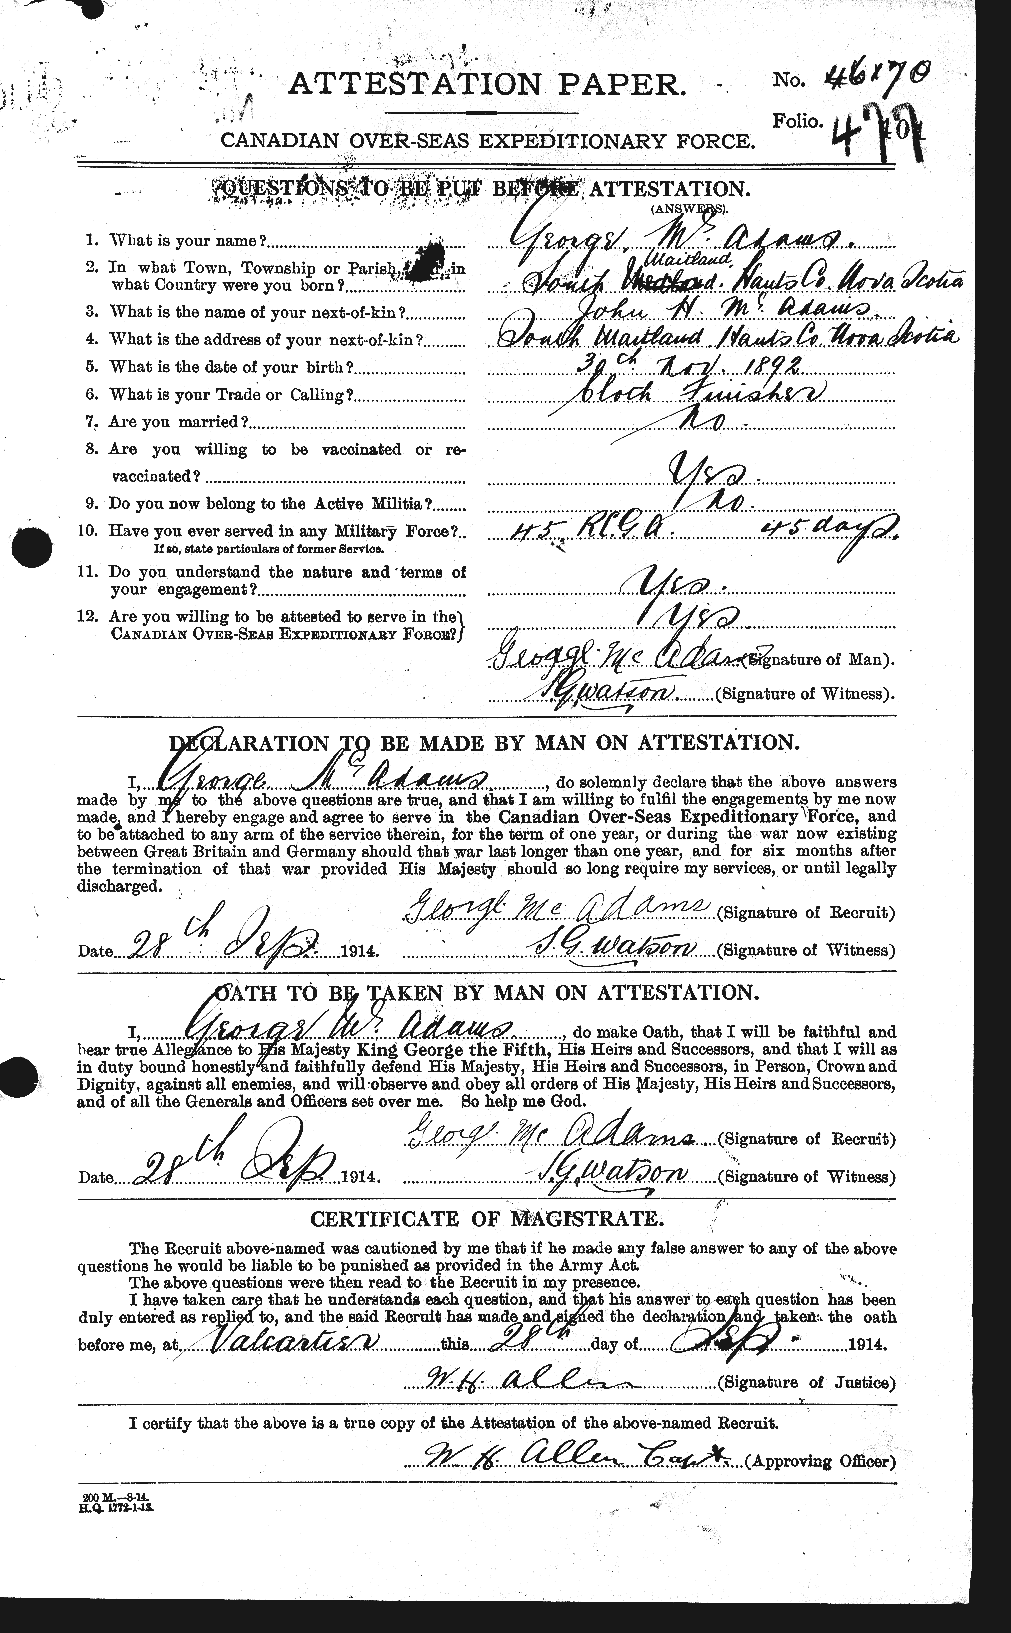 Personnel Records of the First World War - CEF 130220a